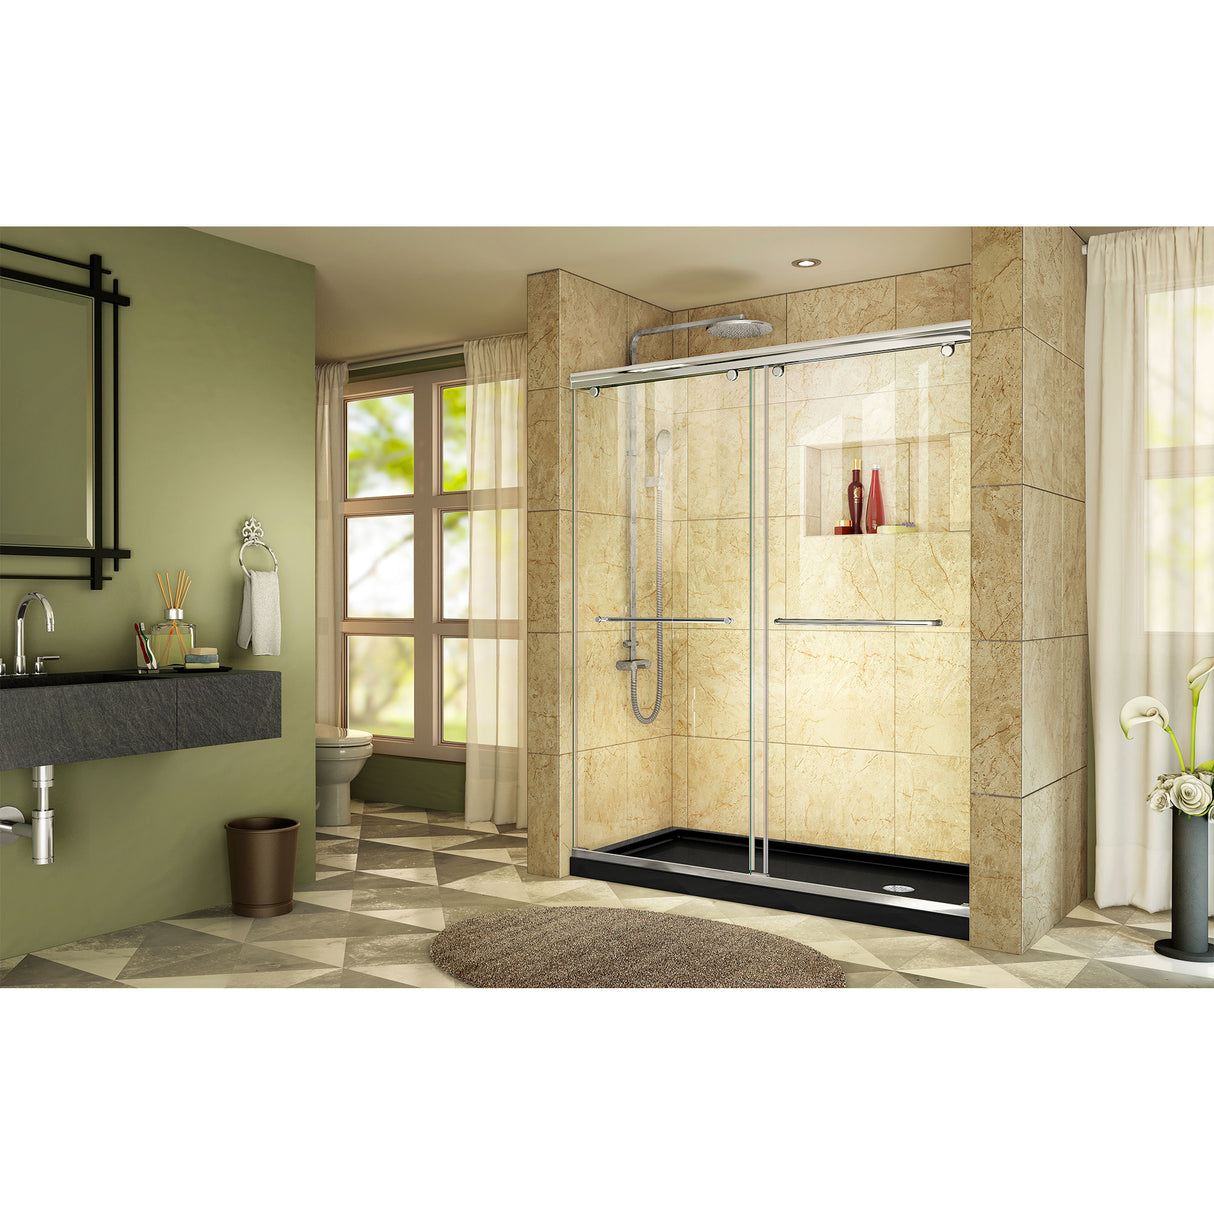 DreamLine Charisma 34 in. D x 60 in. W x 78 3/4 in. H Frameless Bypass Shower Door in Chrome with Right Drain Black Base